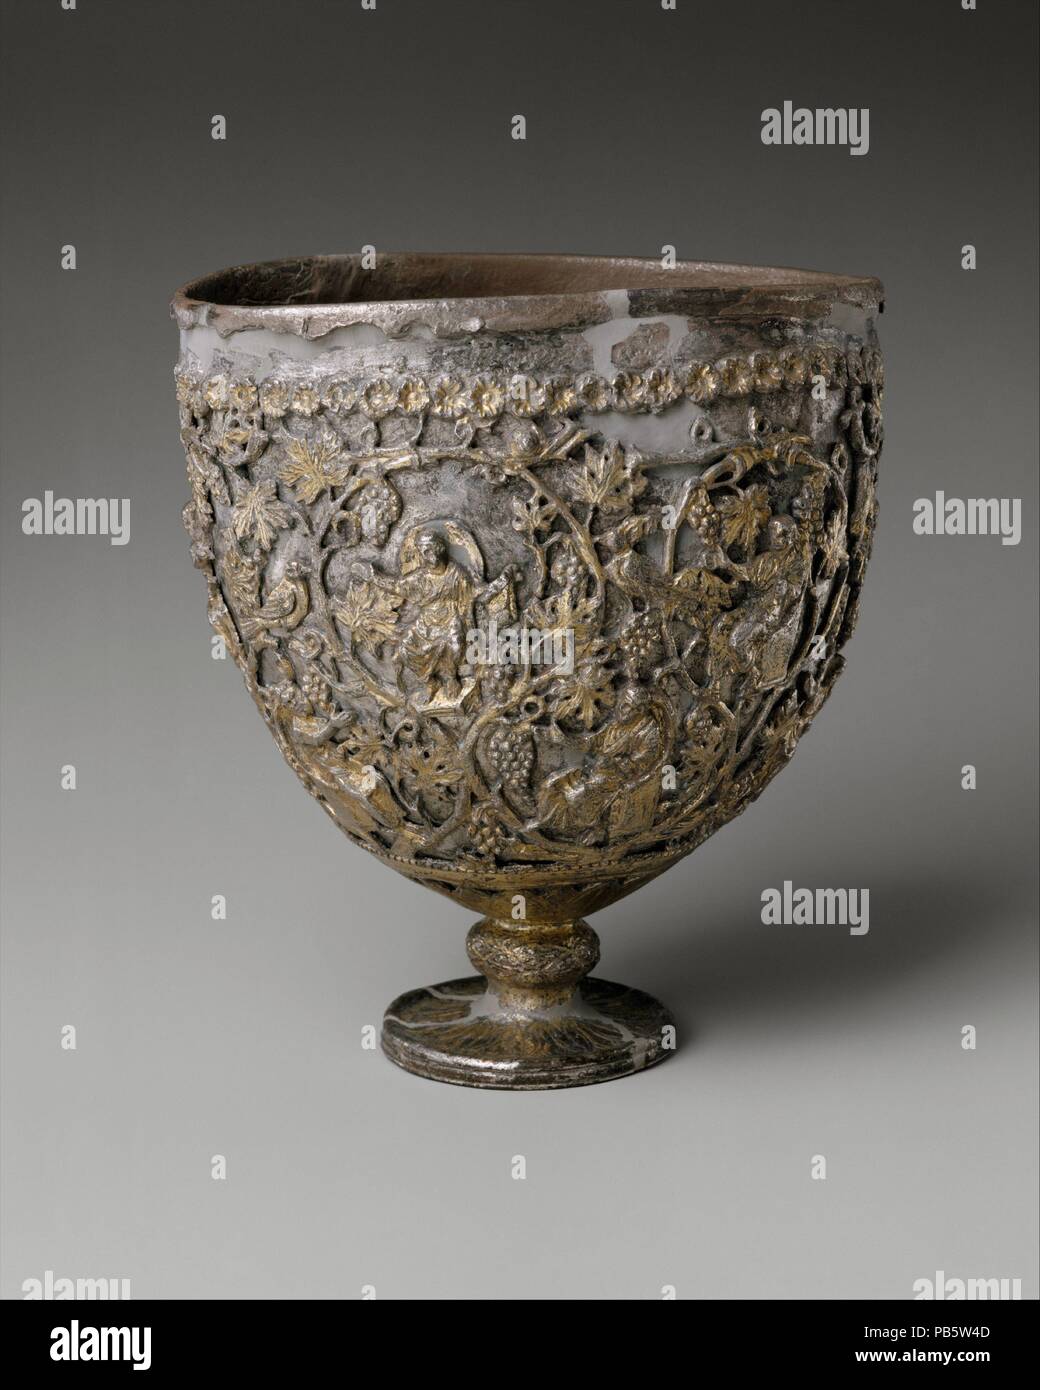 The Antioch 'Chalice'. Culture: Byzantine. Dimensions: Overall: 7 11/16 x 7 1/16 x 6 in. (19.6 x 18 x 15.2 cm)  foot: 2 15/16 in. (7.4 cm). Date: 500-550.  When it was discovered at the beginning of the twentieth century, this 'chalice' was claimed to have been found in Antioch, a city so important to the early Christians that it was recognized with Rome and Alexandria as one of the great sees of the church. The chalice's plain silver interior bowl was then ambitiously identified as the Holy Grail, the cup used by Christ at the Last Supper. The elaborate footed shell enclosing it was thought t Stock Photo